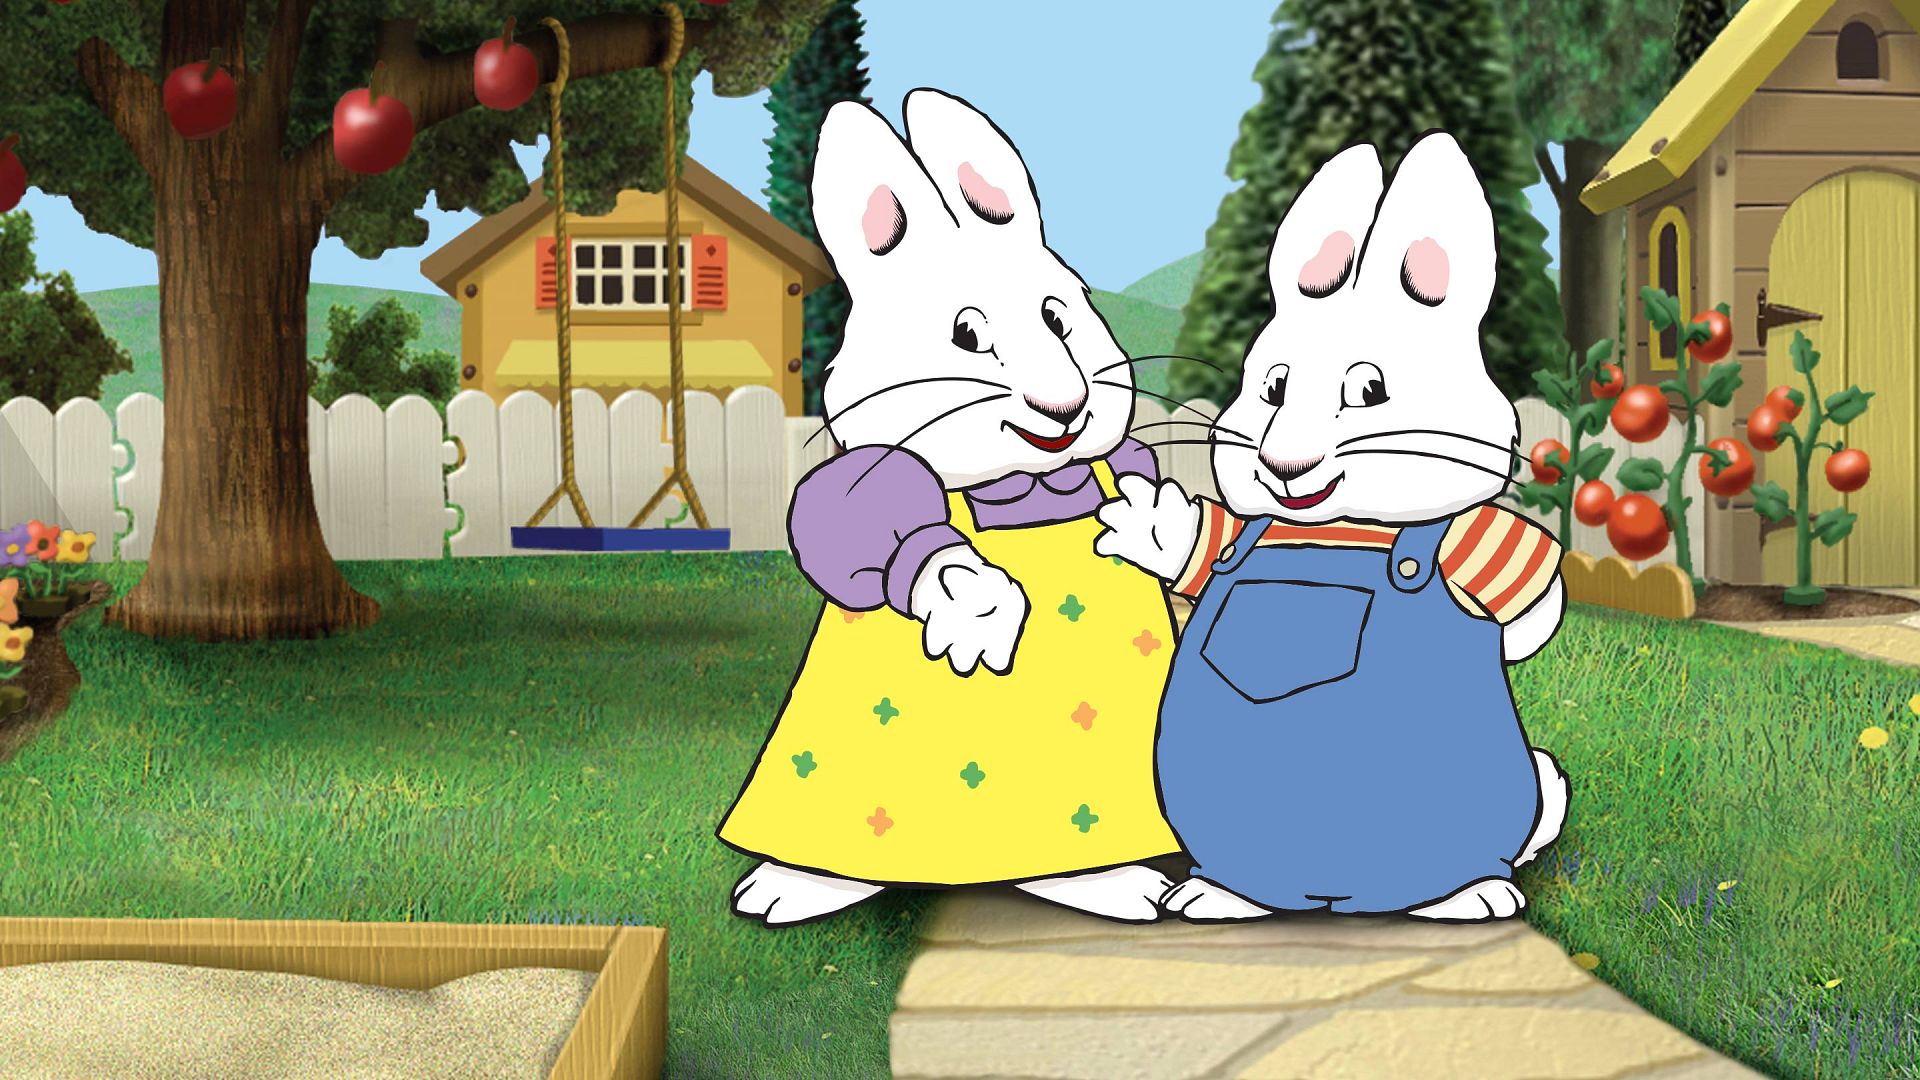 Gallery of Max And Ruby Rainy Day.